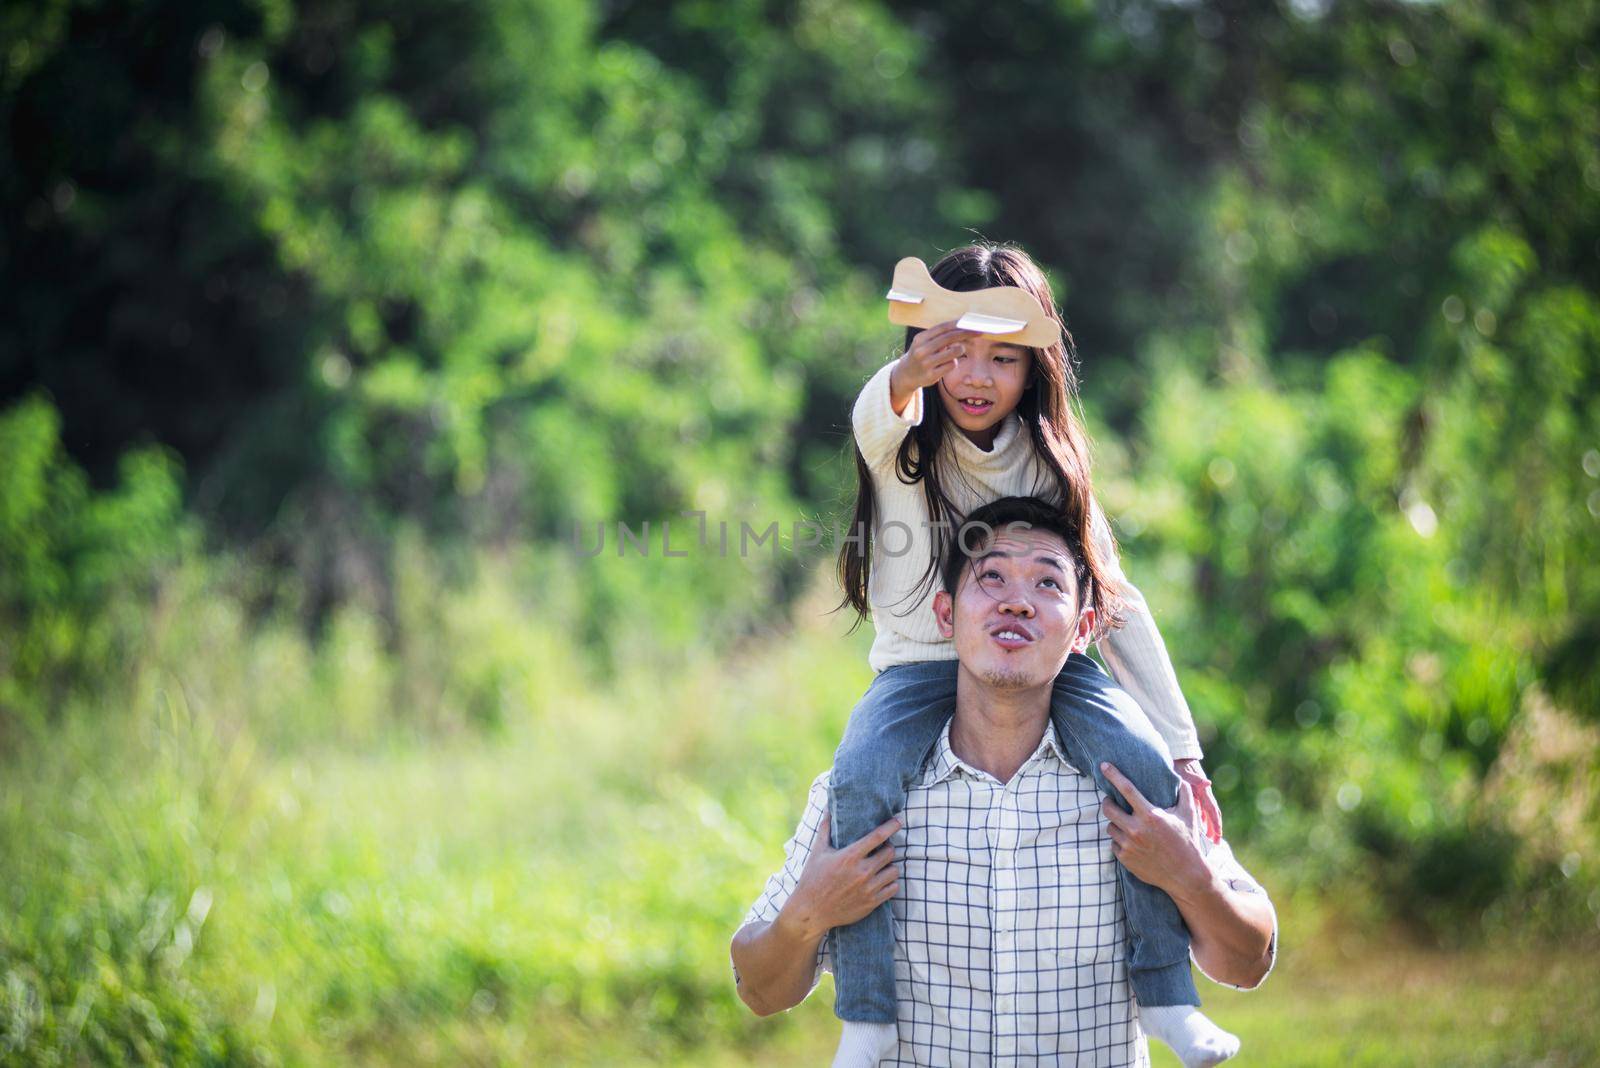 father and carrying an excited girl on shoulders having fun and enjoying outdoor lifestyle together playing aircraft toy by Sorapop